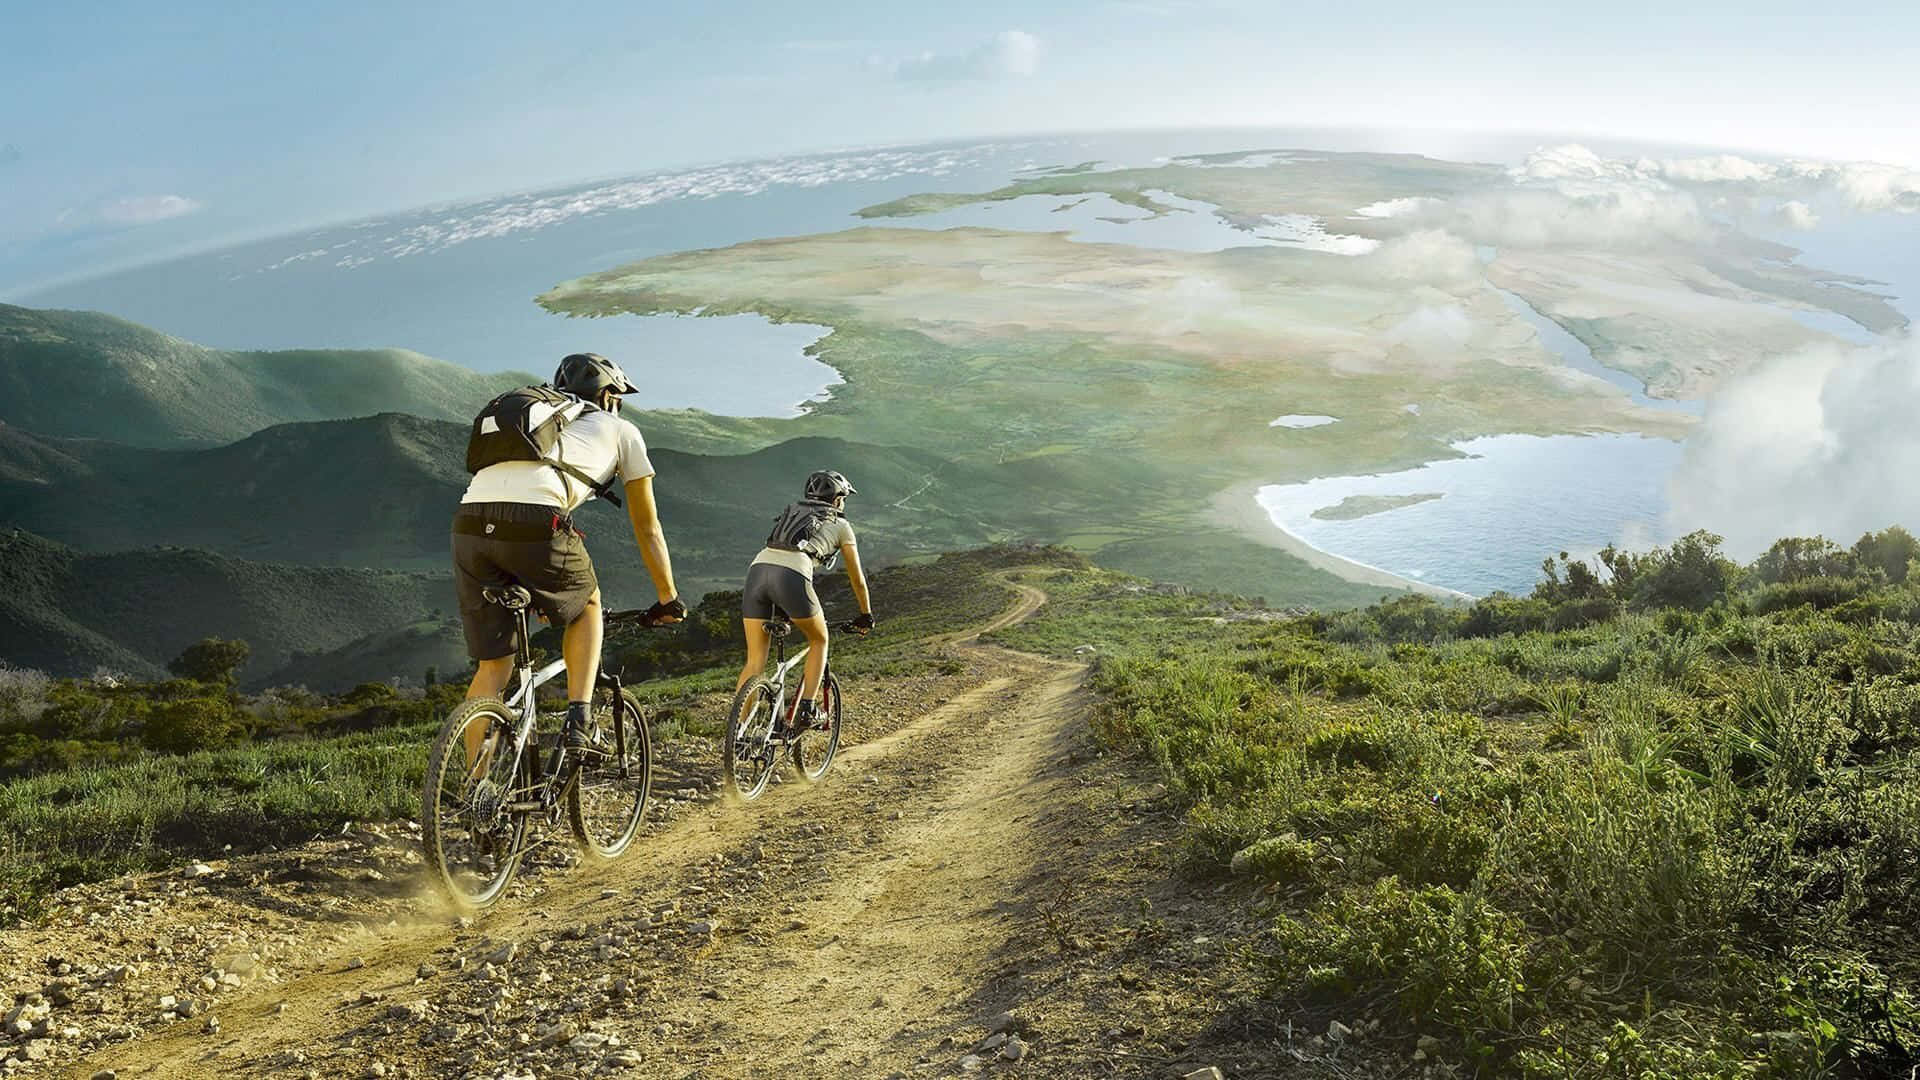 Two mountain bikers navigate the trails of a stunning natural landscape